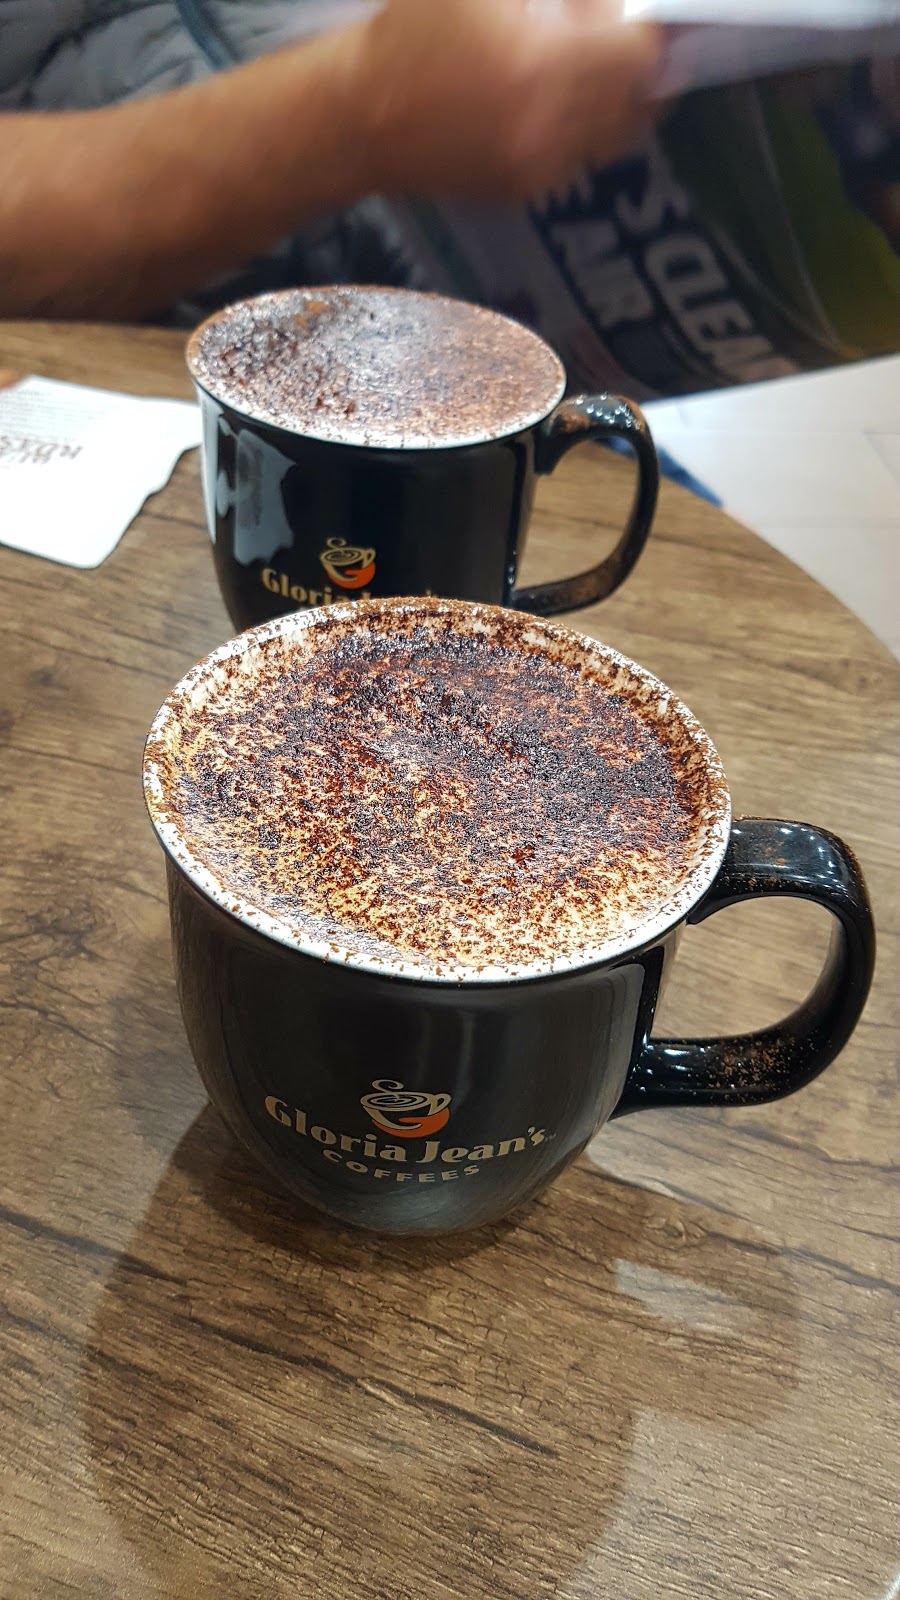 Gloria Jeans Coffees | 15 Morts Rd, Mortdale NSW 2223, Australia | Phone: (02) 9579 1501